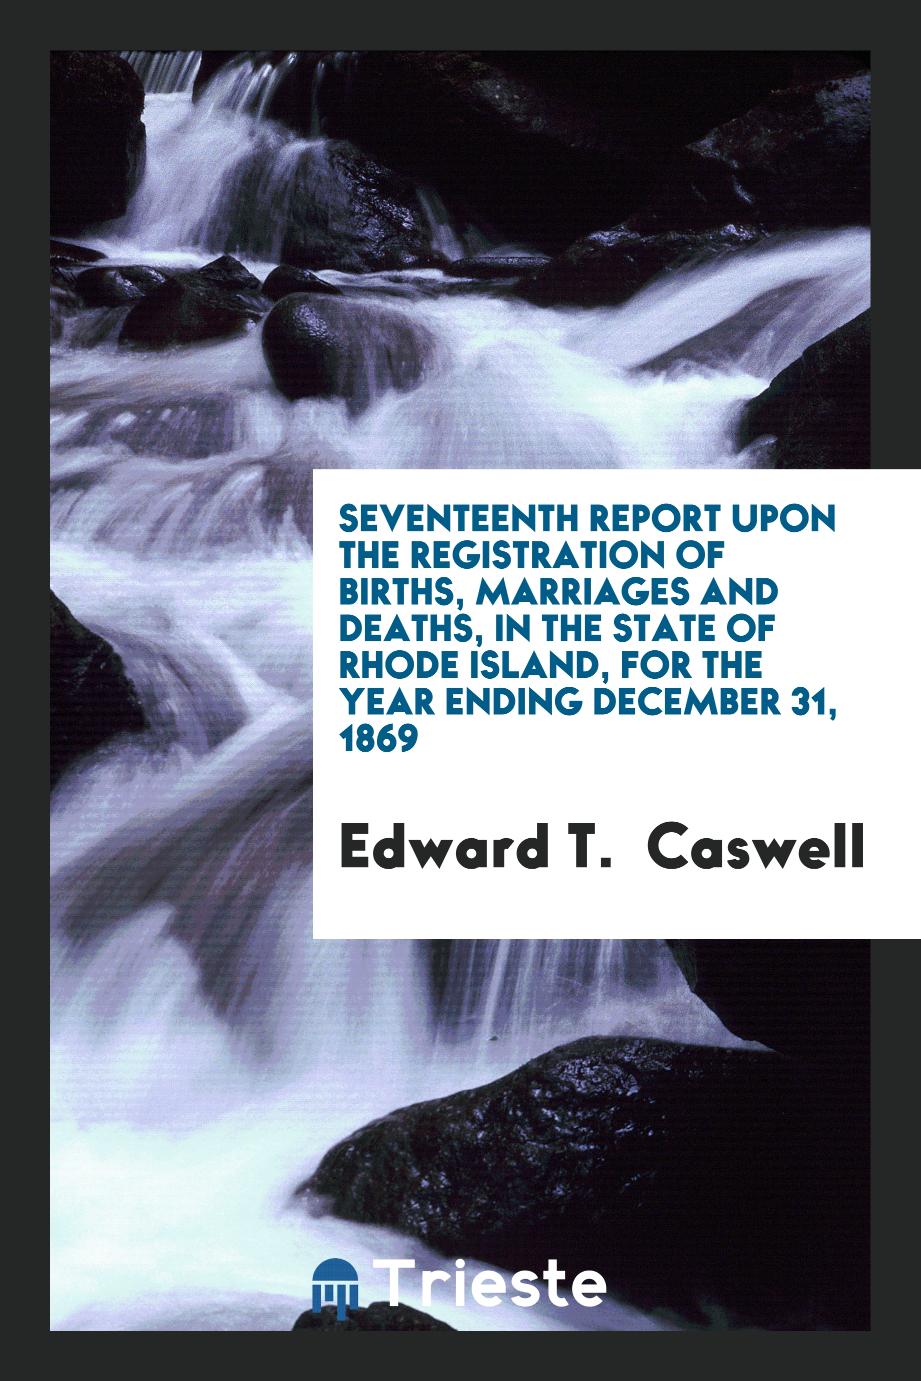 Seventeenth Report upon the Registration of Births, Marriages and Deaths, in the State of Rhode Island, for the Year Ending December 31, 1869